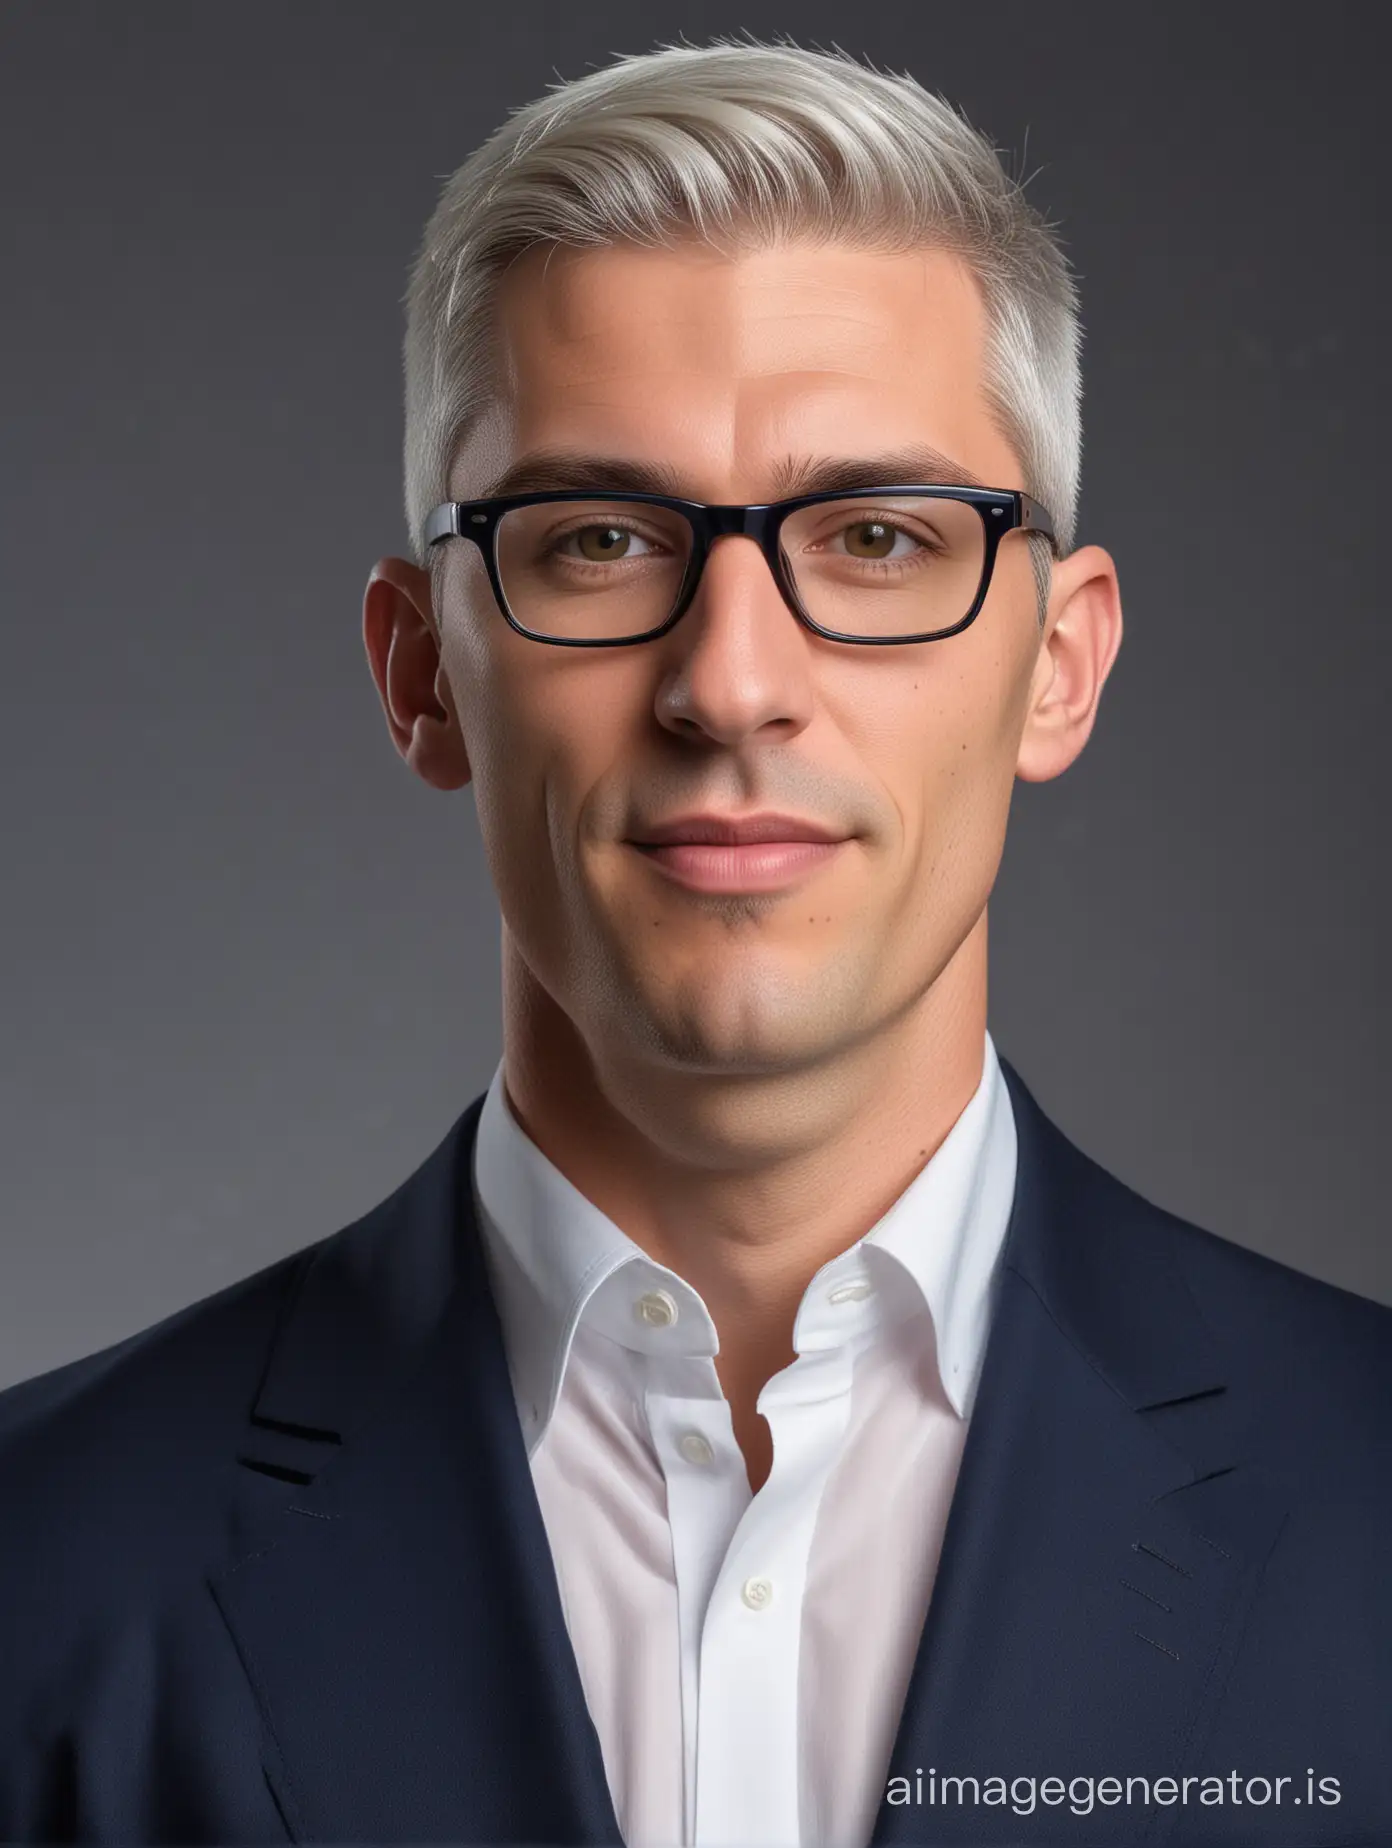 Professional portrait photo of a tall man, 35 years old, athletic, square face, wide jaw, thick neck, with navy blue blazer, white shirt, no tie, open collar, wearing glasses, shaved gray hair